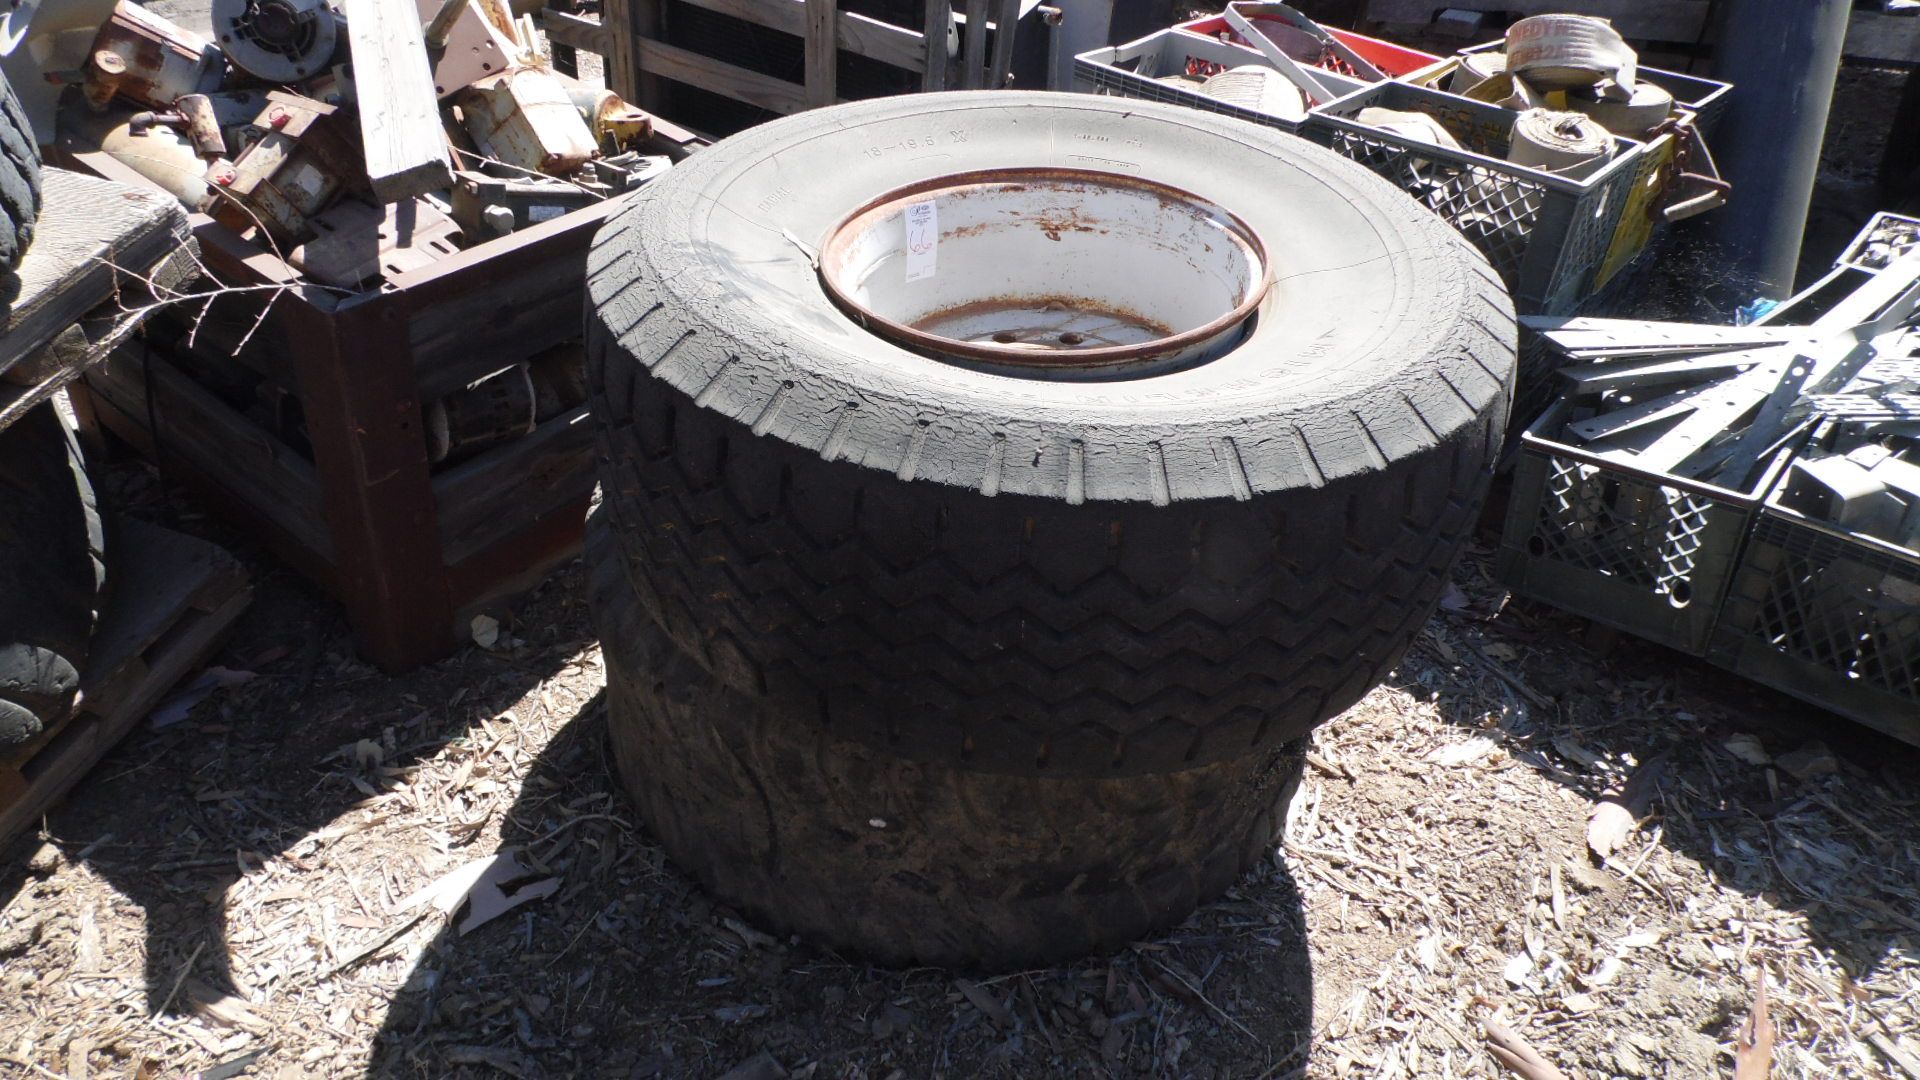 ASSORTED TIRES